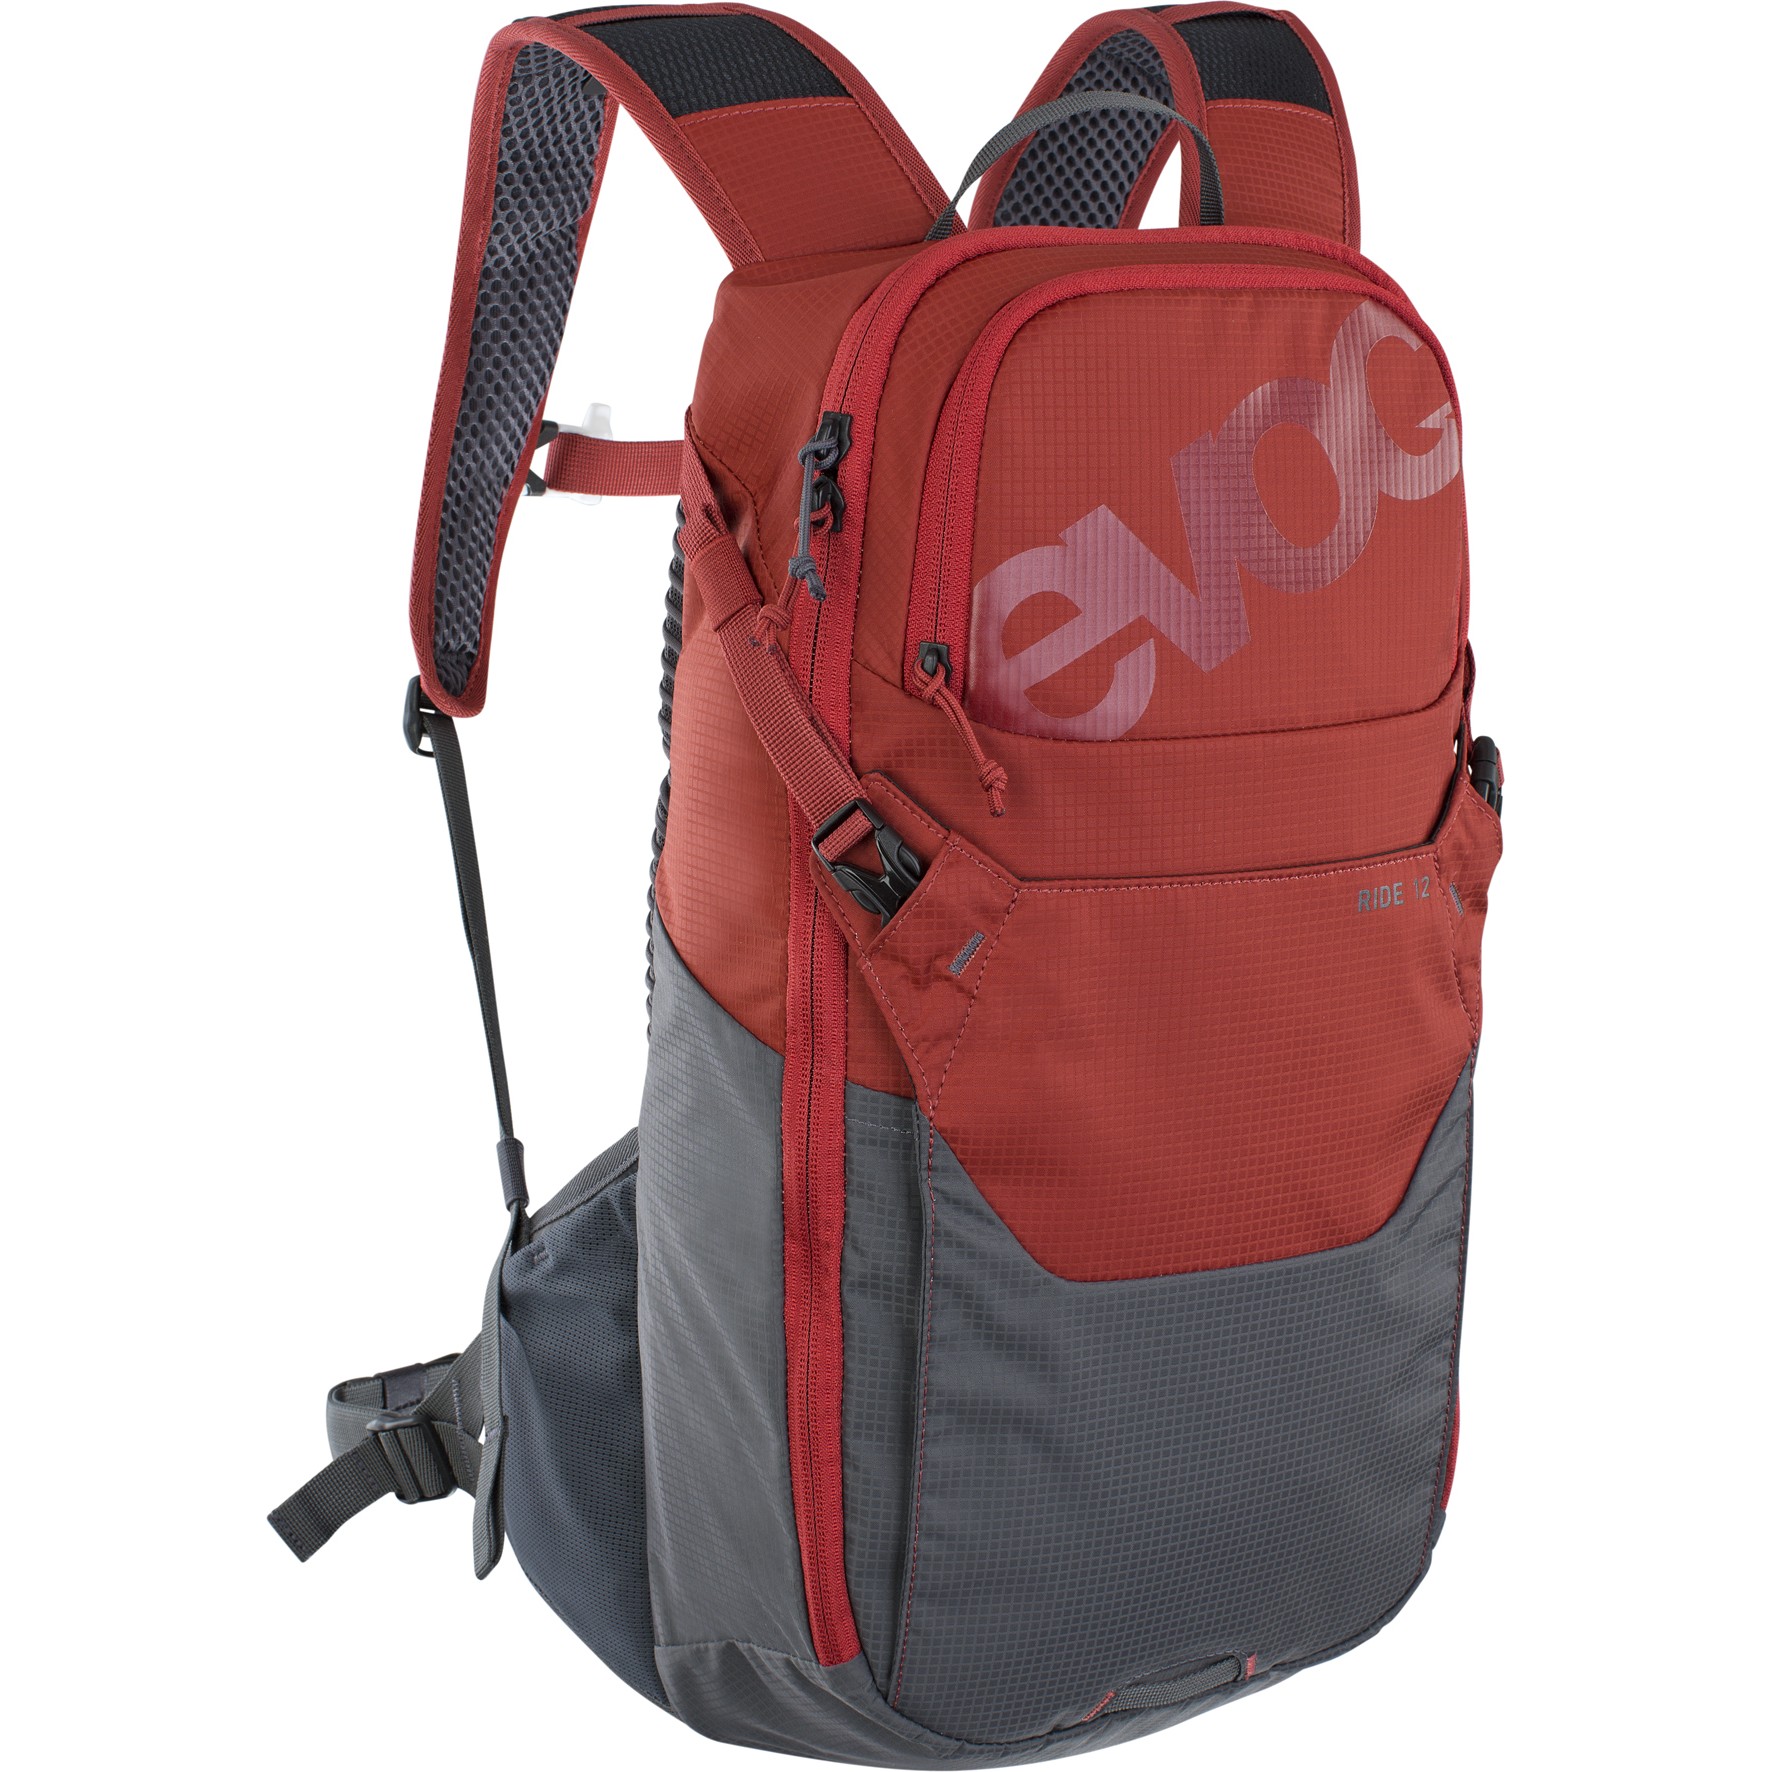 Picture of EVOC Ride 12L Backpack - Chili Red / Carbon Grey